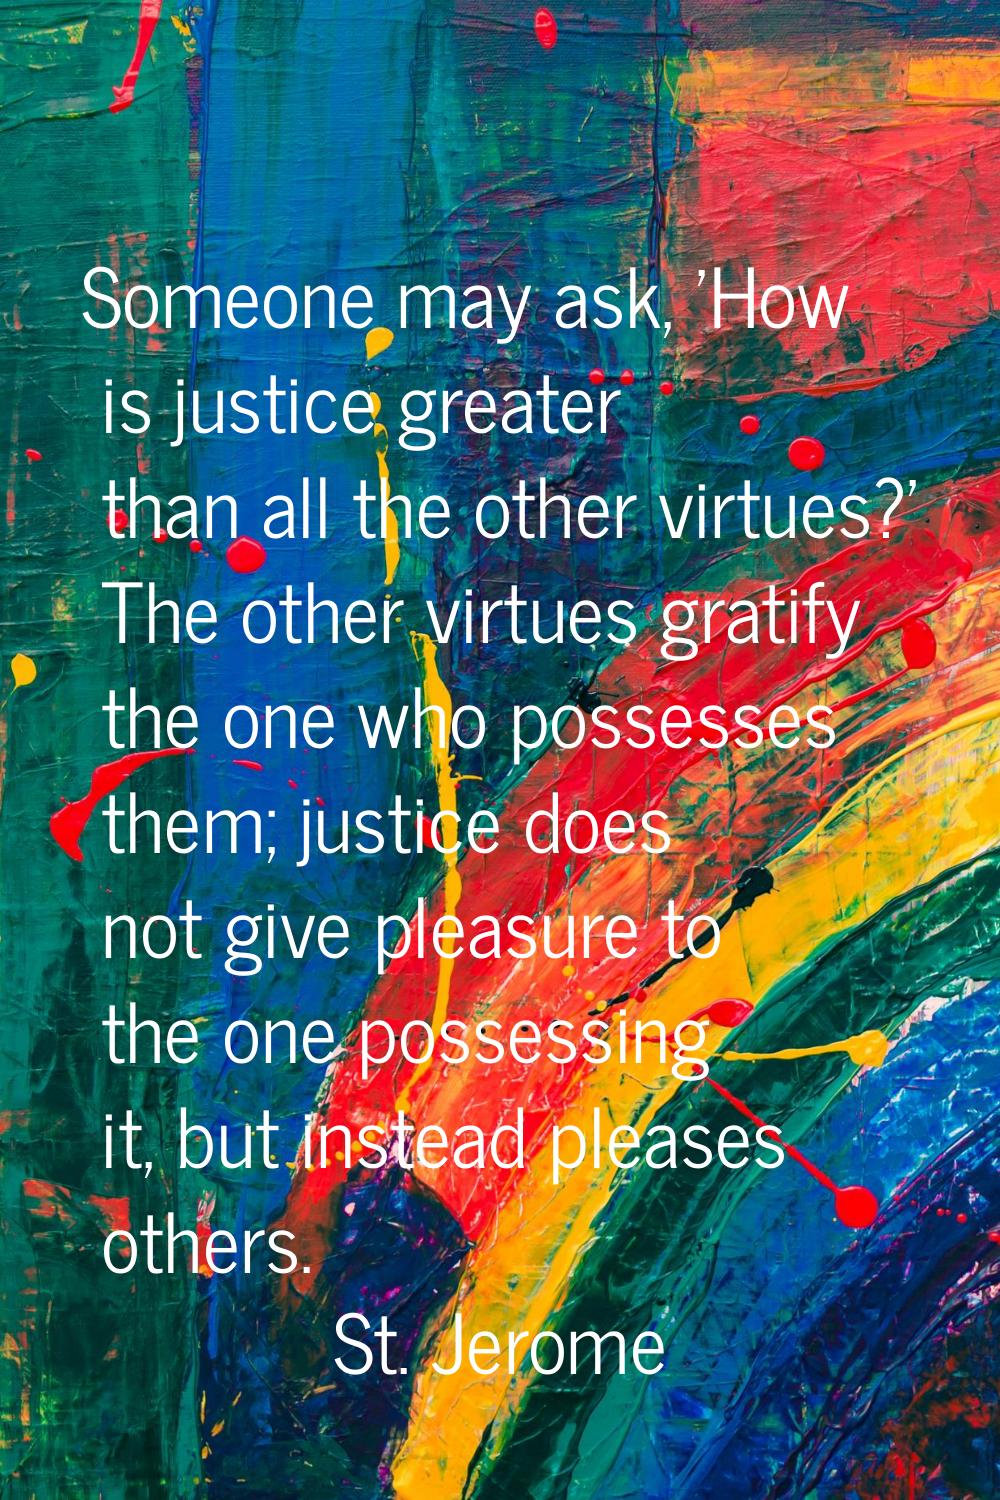 Someone may ask, 'How is justice greater than all the other virtues?' The other virtues gratify the